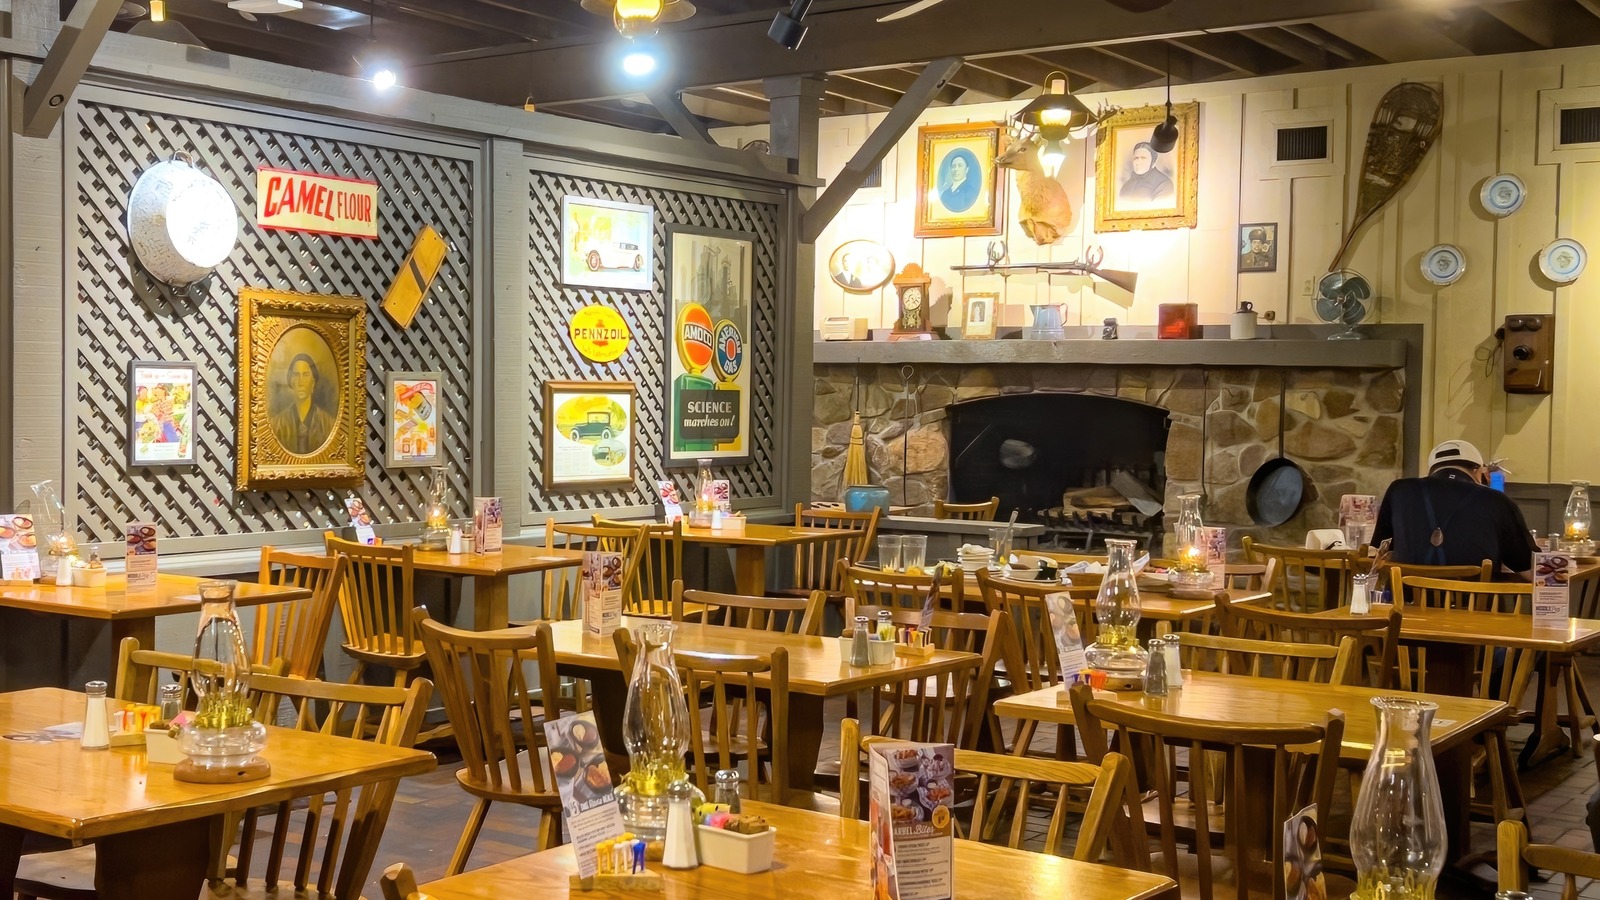 The 5 Decorations You'll Find In Every Single Existing Cracker Barrel